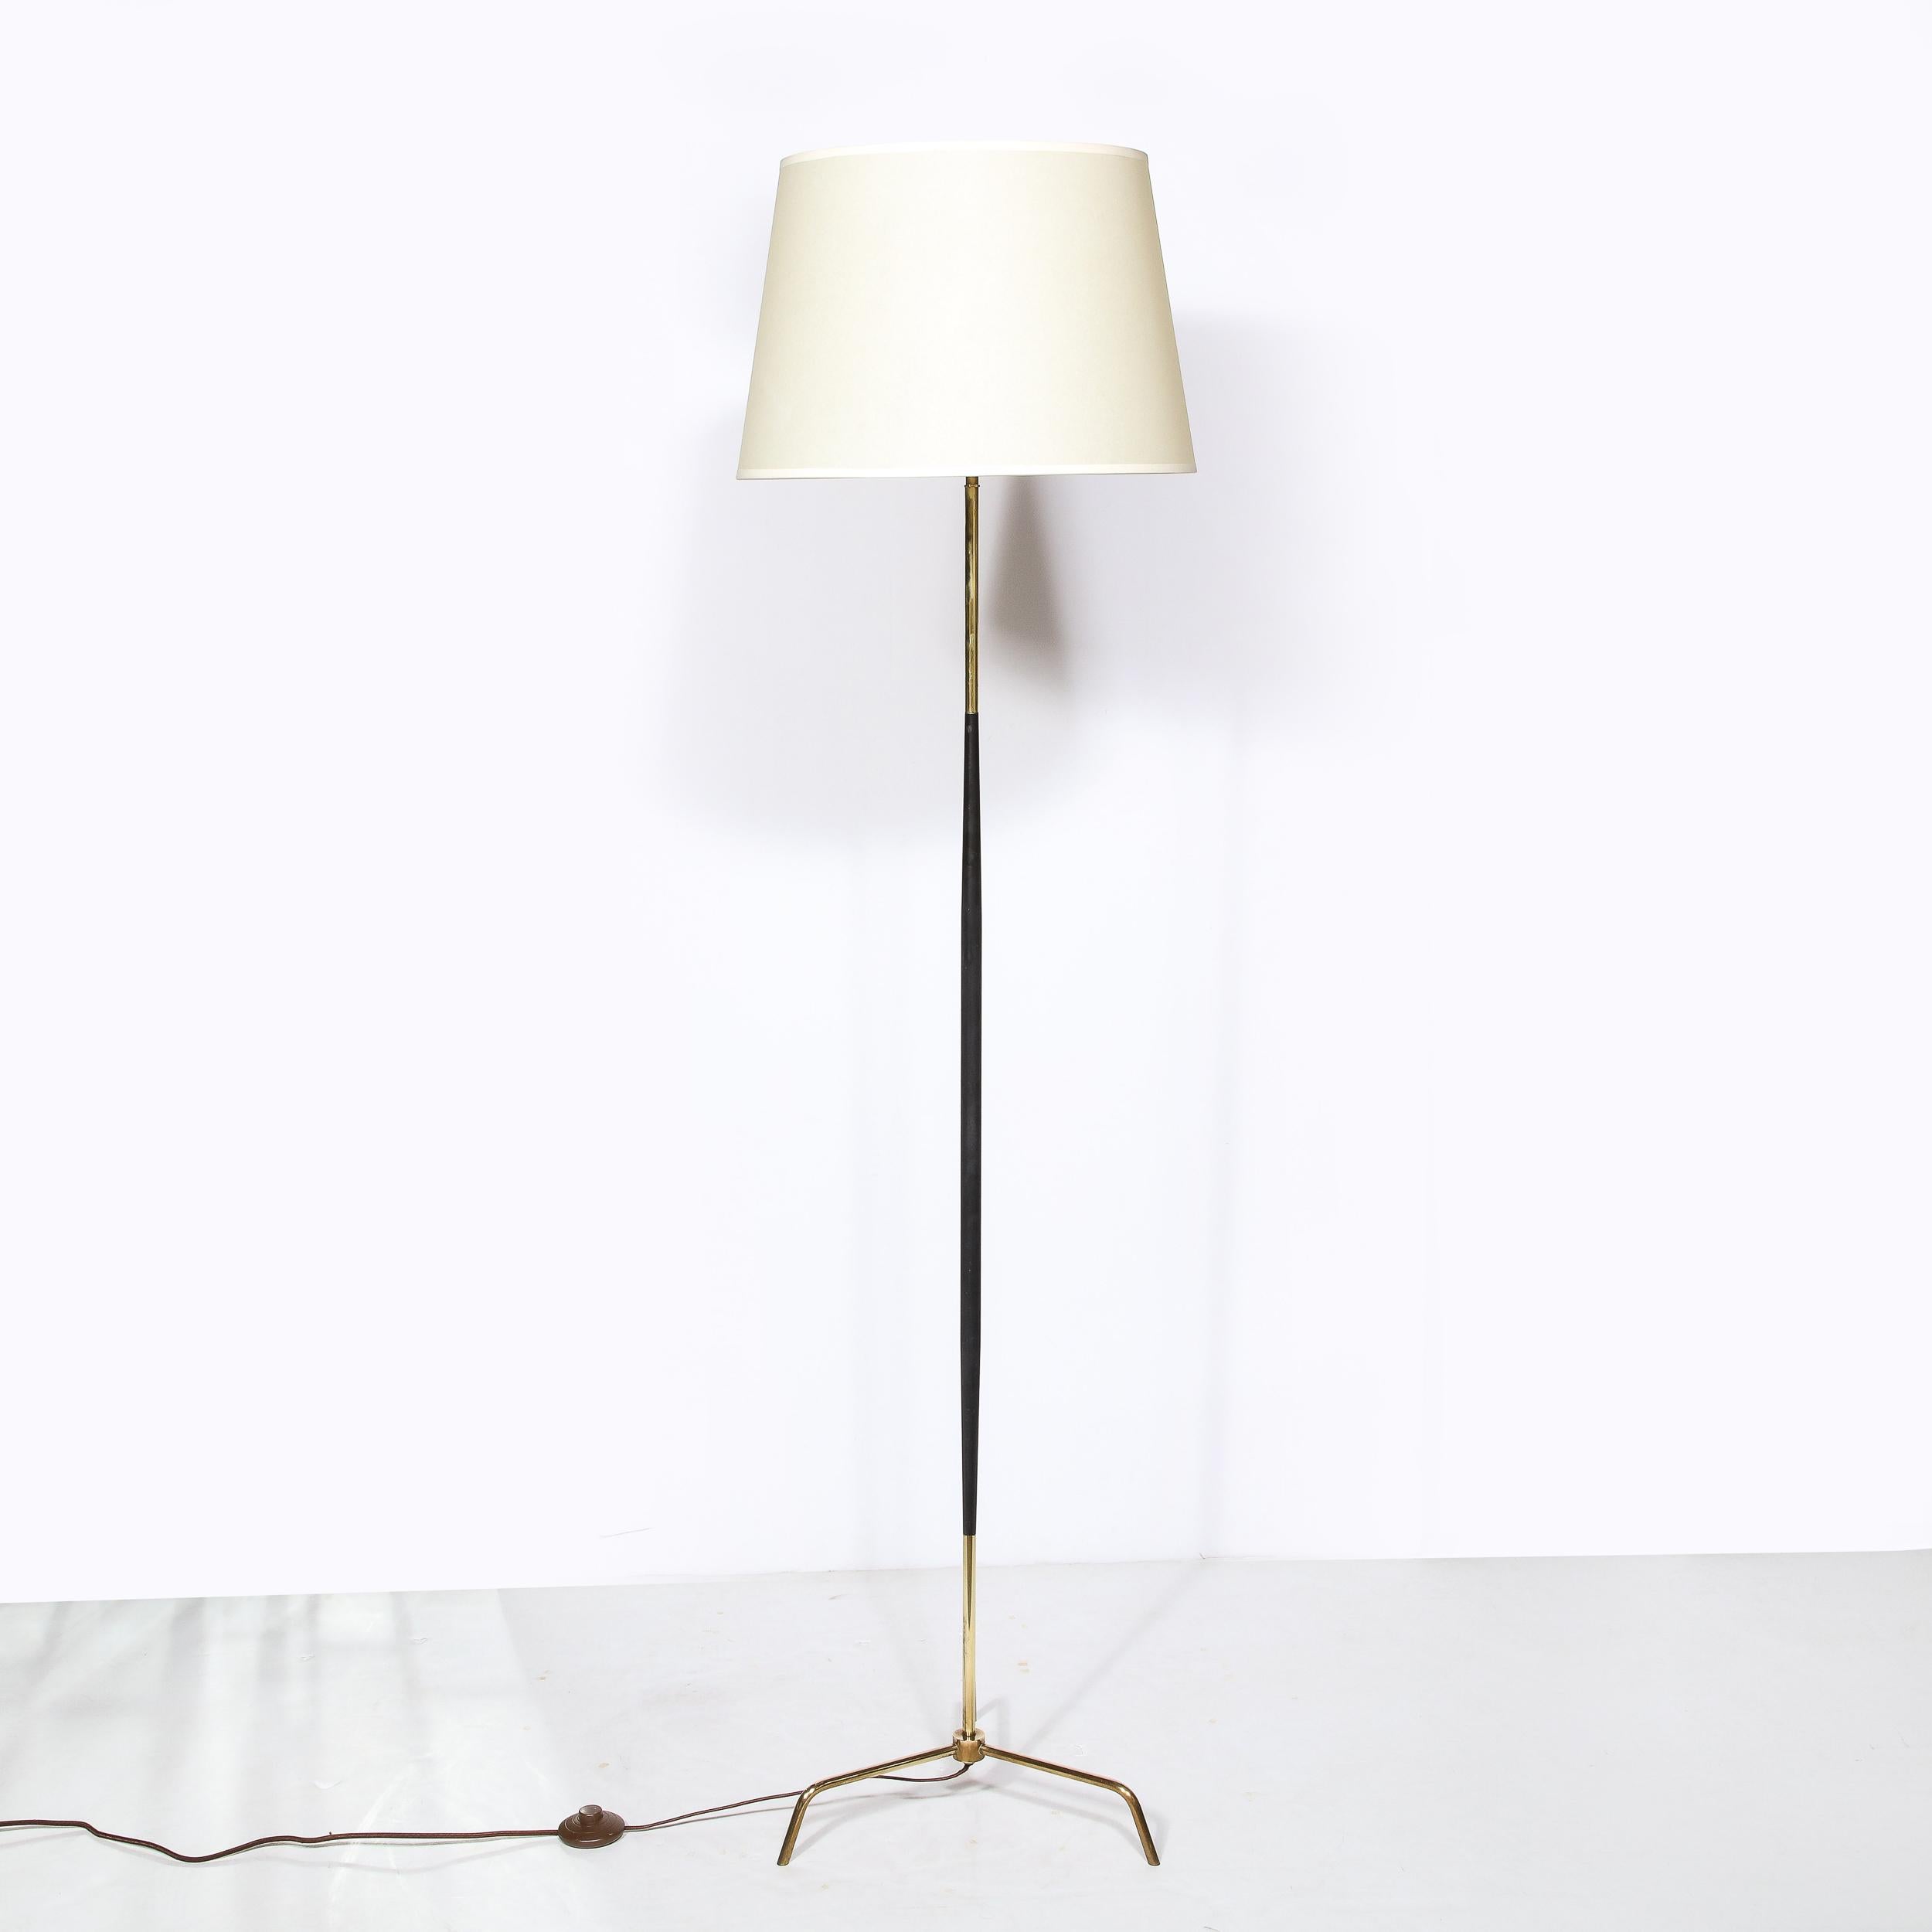 This elegant Mid-Century Modern floor lamp was realized in France circa 1950. It features a tripod style base in lustrous brass consisting of three elegantly apportioned feet arched like bird talons and supporting the body of the lamp. The stem of